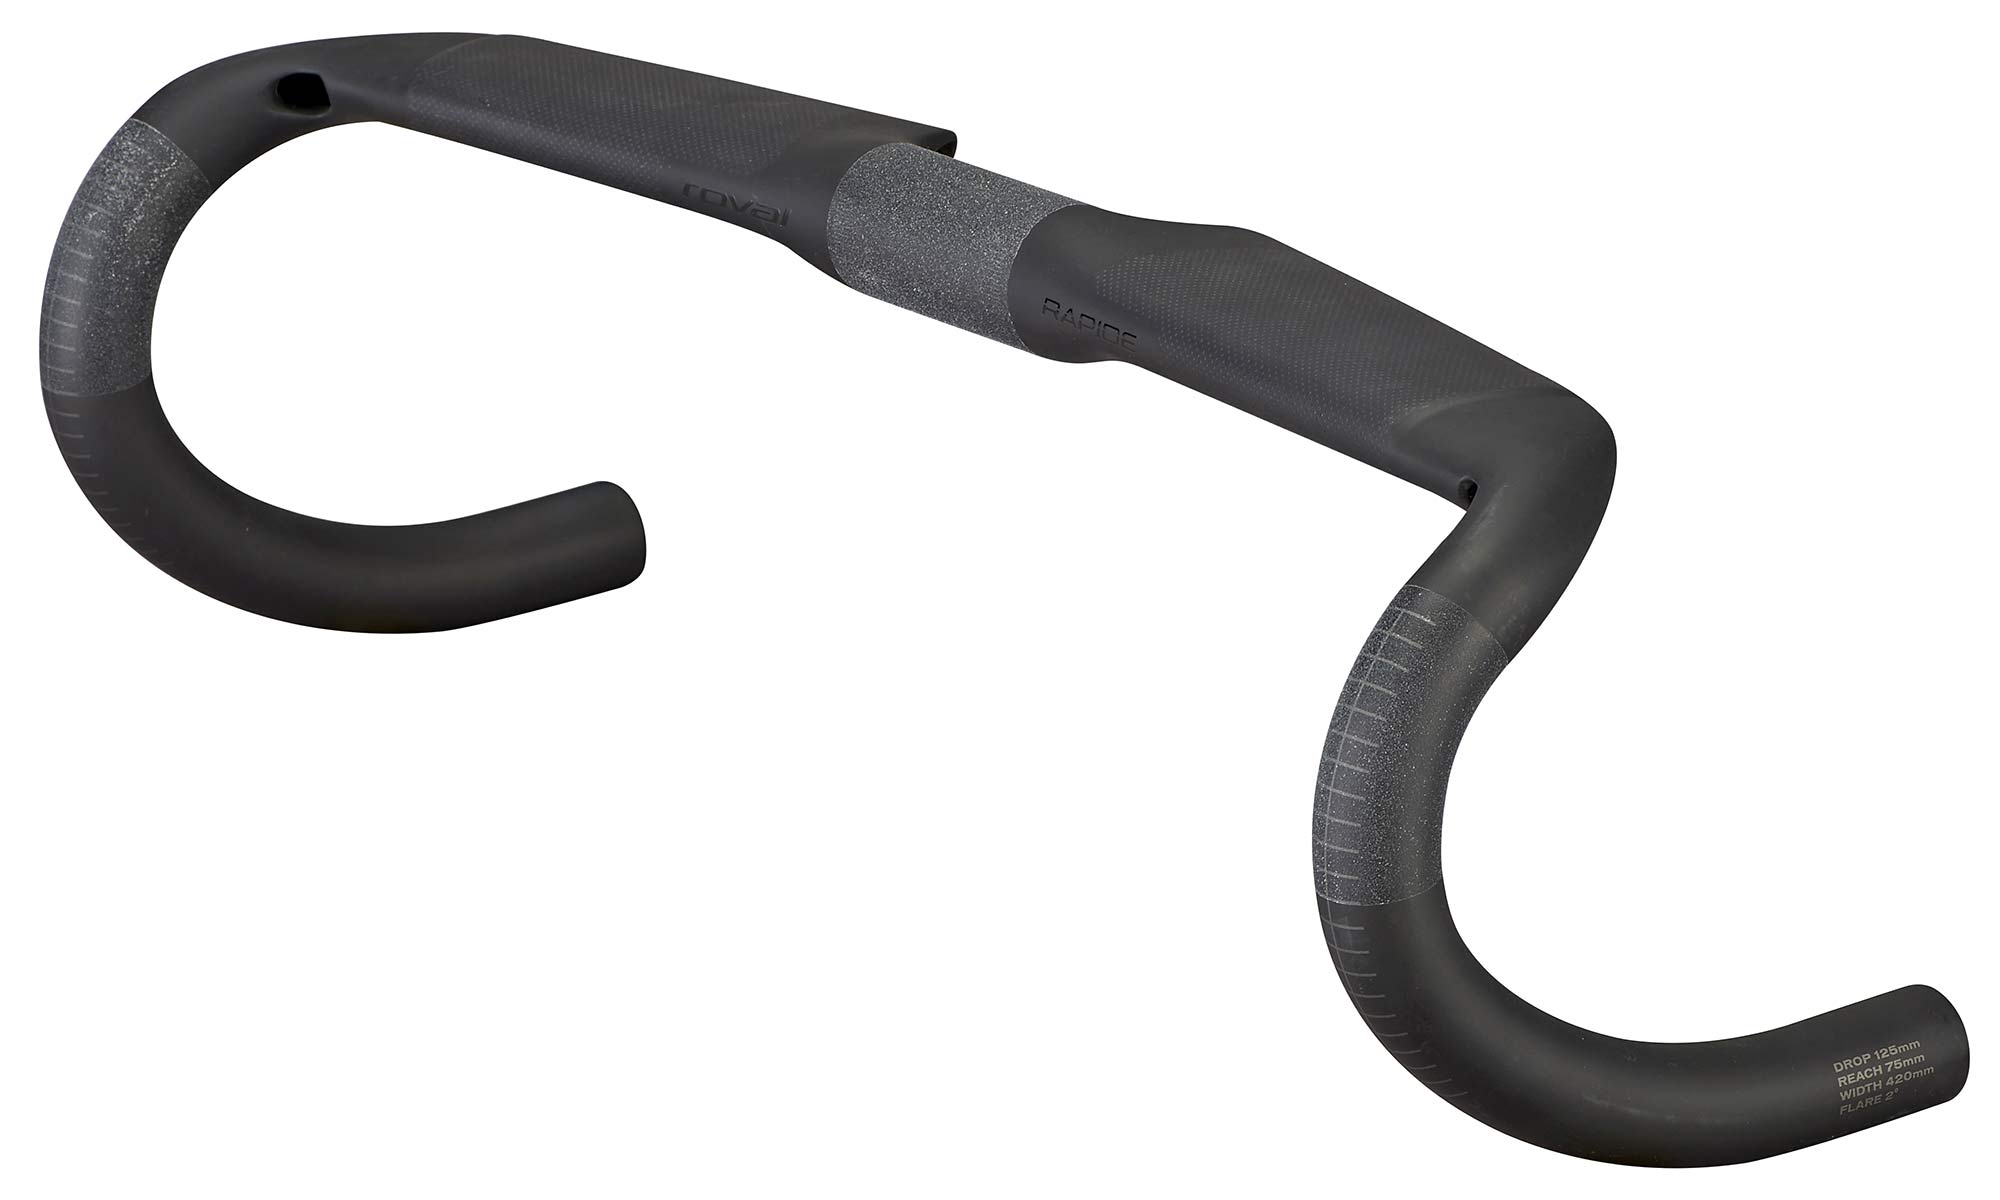 Roval Rapide lightweight aero carbon handlebar, more rapid, less weight, studio angled